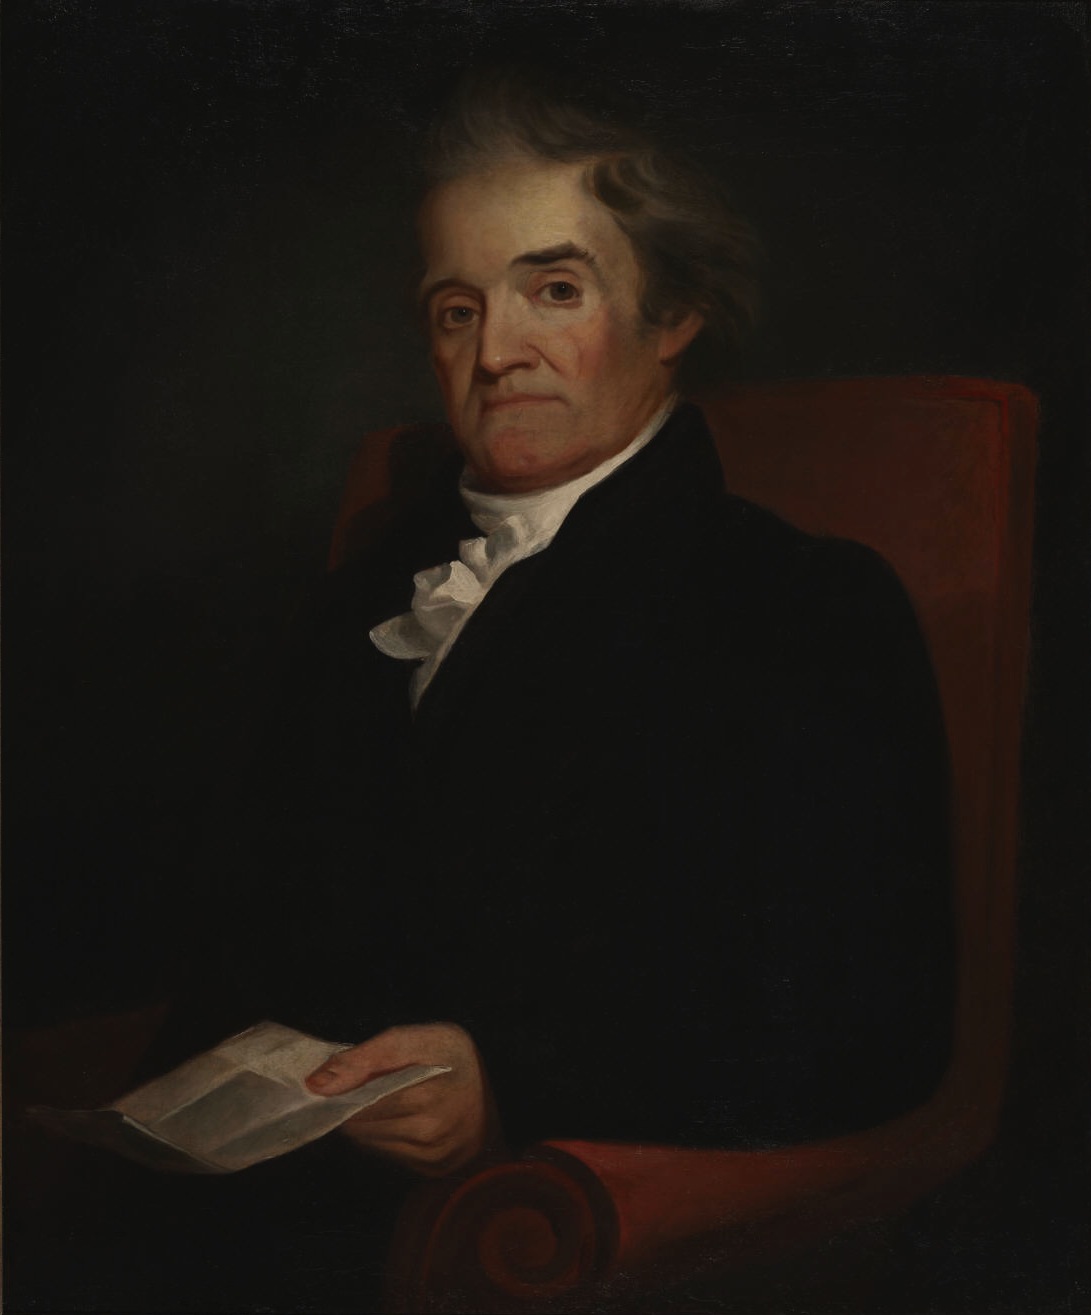 Noah Webster (1758-1843) - Founding Fathers